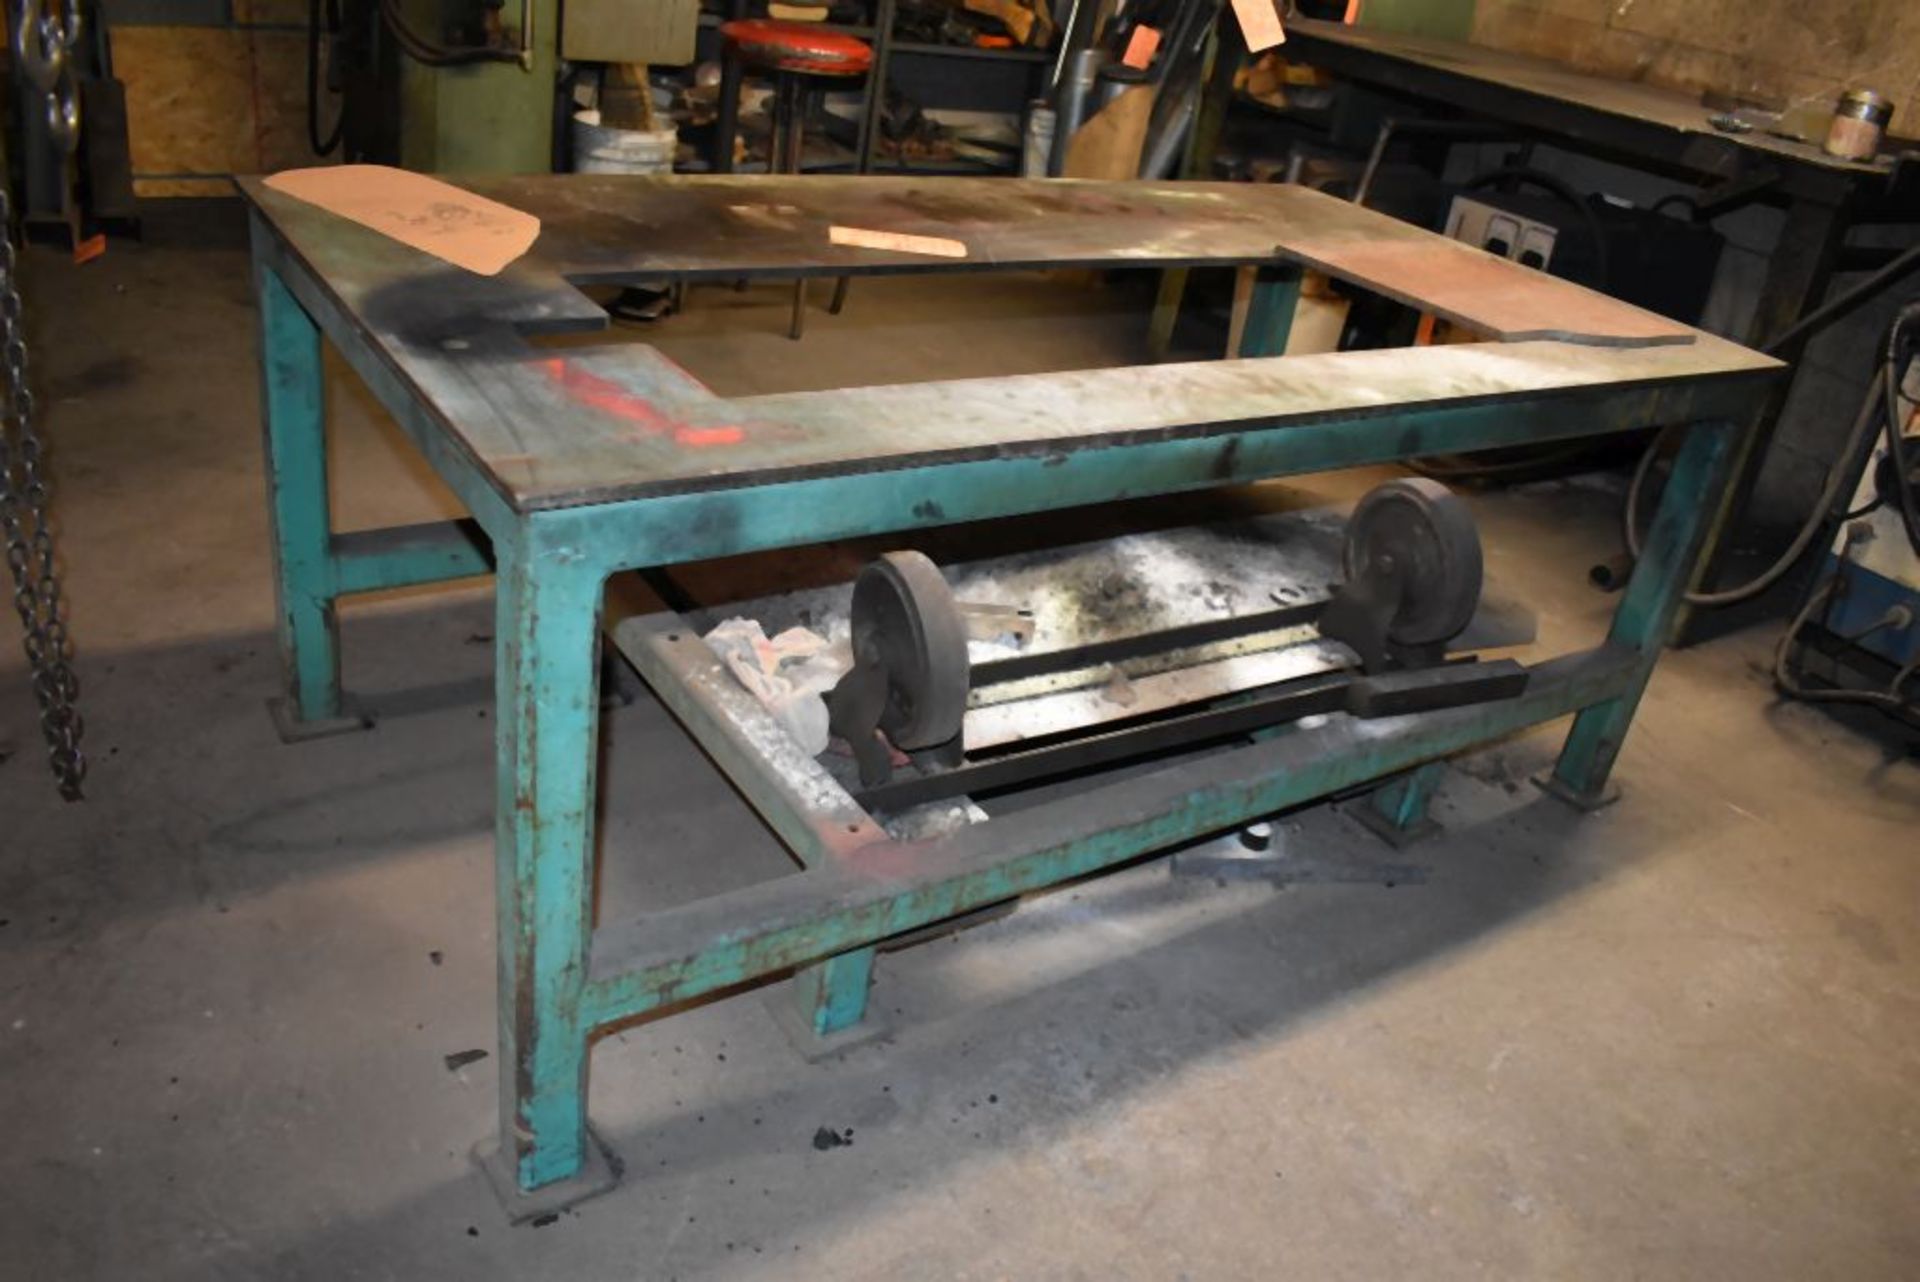 HEAVY DUTY STEEL SHOP TABLE, 5'4"L x 36"D x 27"H, HOLE IN TOP - Image 2 of 2